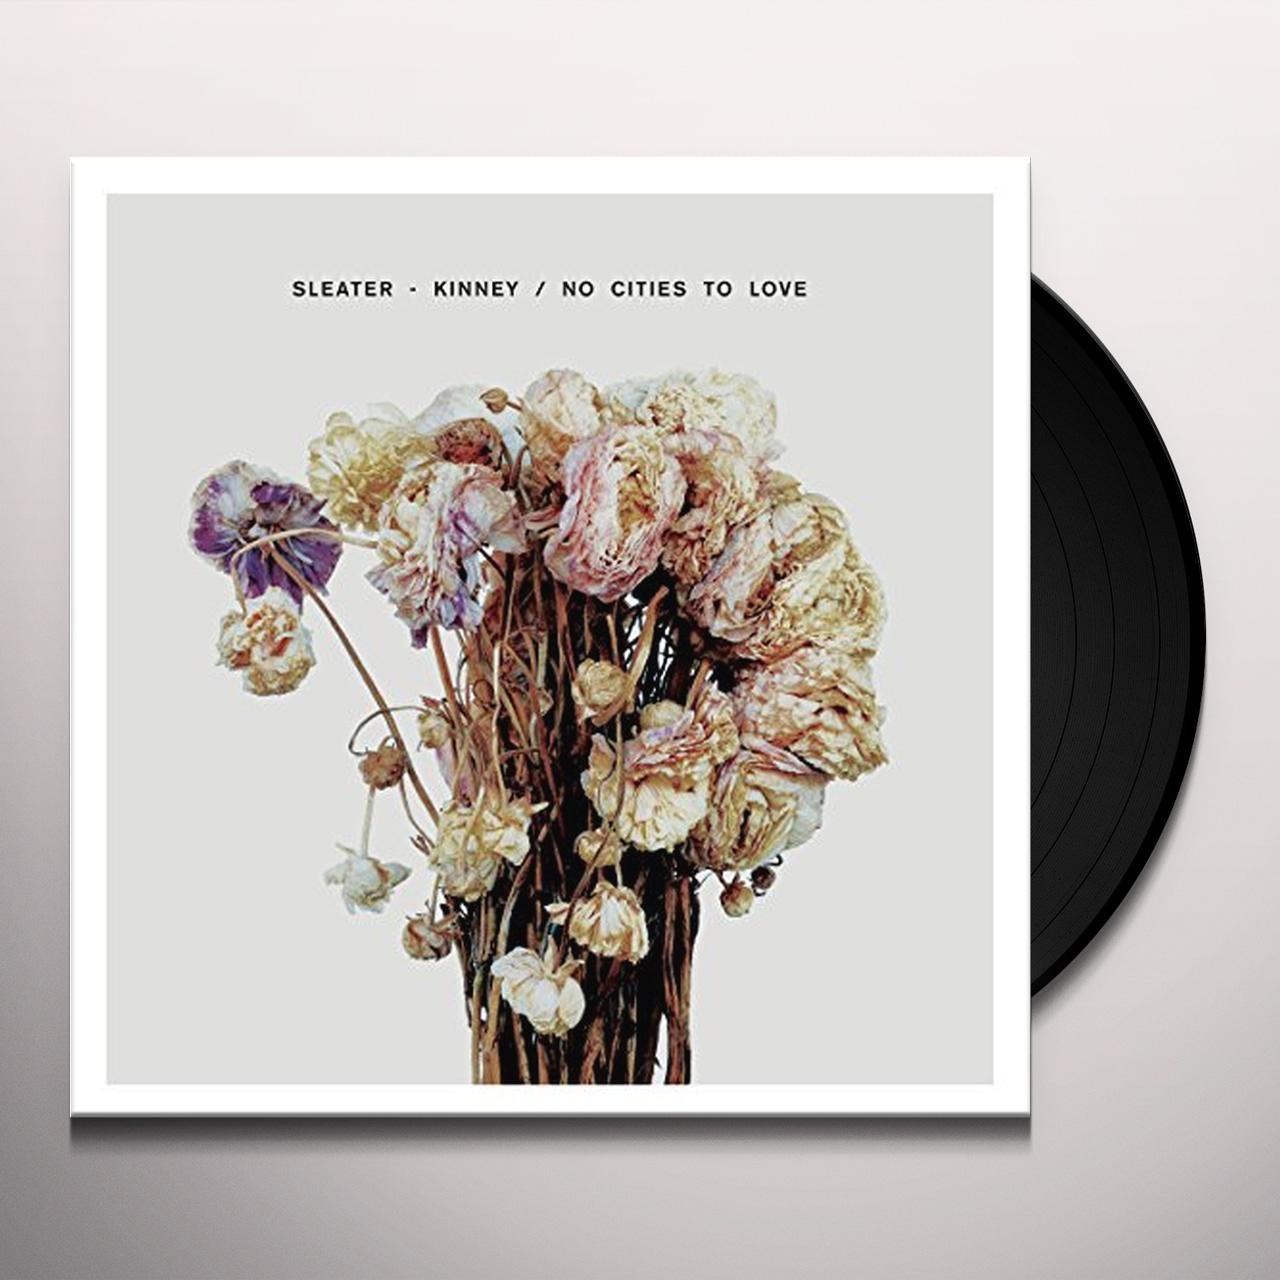 Sleater-Kinney - No Cities to Love (Gatefold, Digital Download) - 098787110012 - LP's - Yellow Racket Records